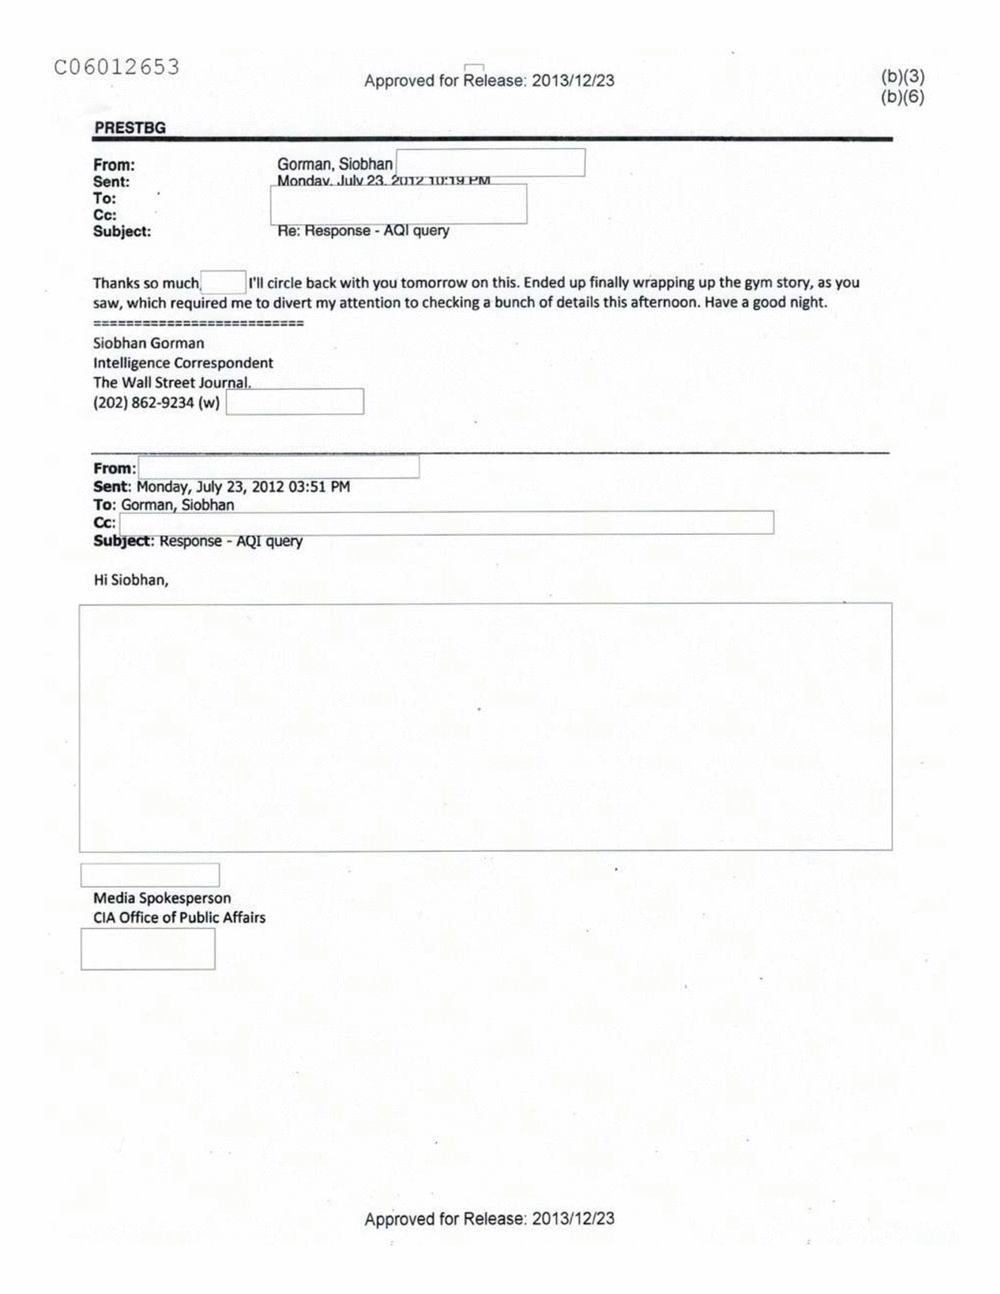 Page 229 from Email Correspondence Between Reporters and CIA Flacks